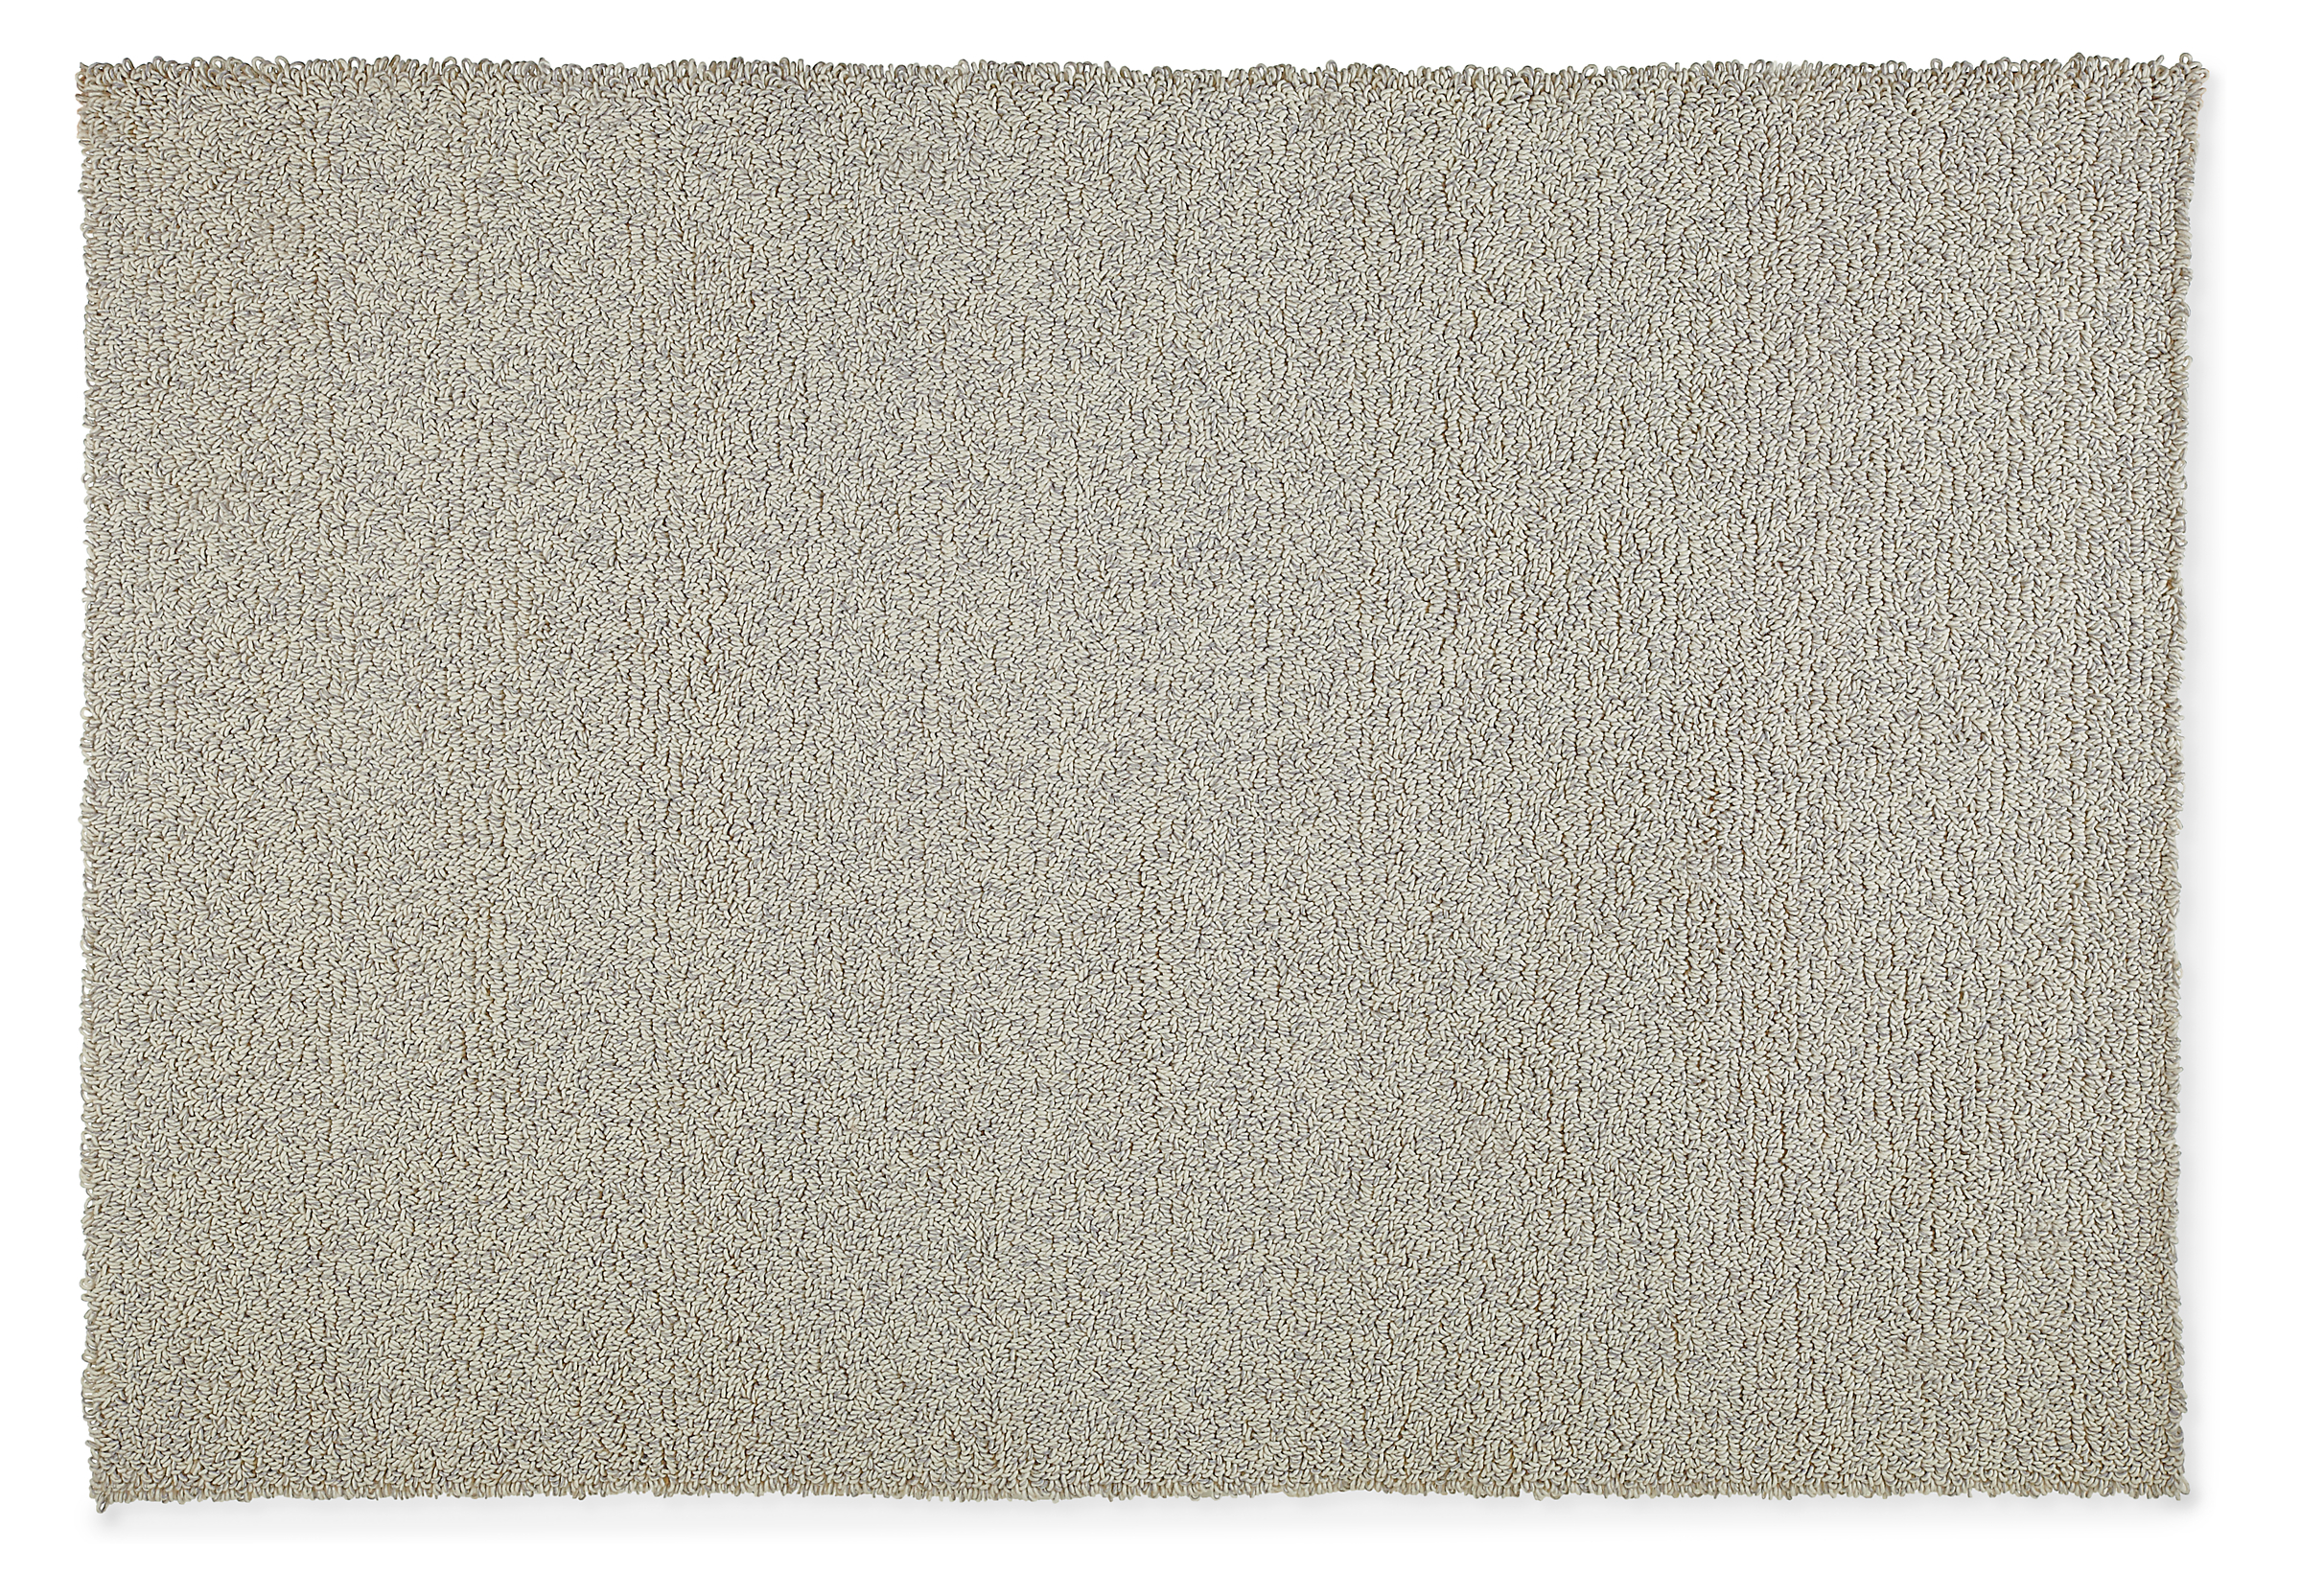 Arden High Loop 11'10"x11'10" Square Rug in Ivory/Grey